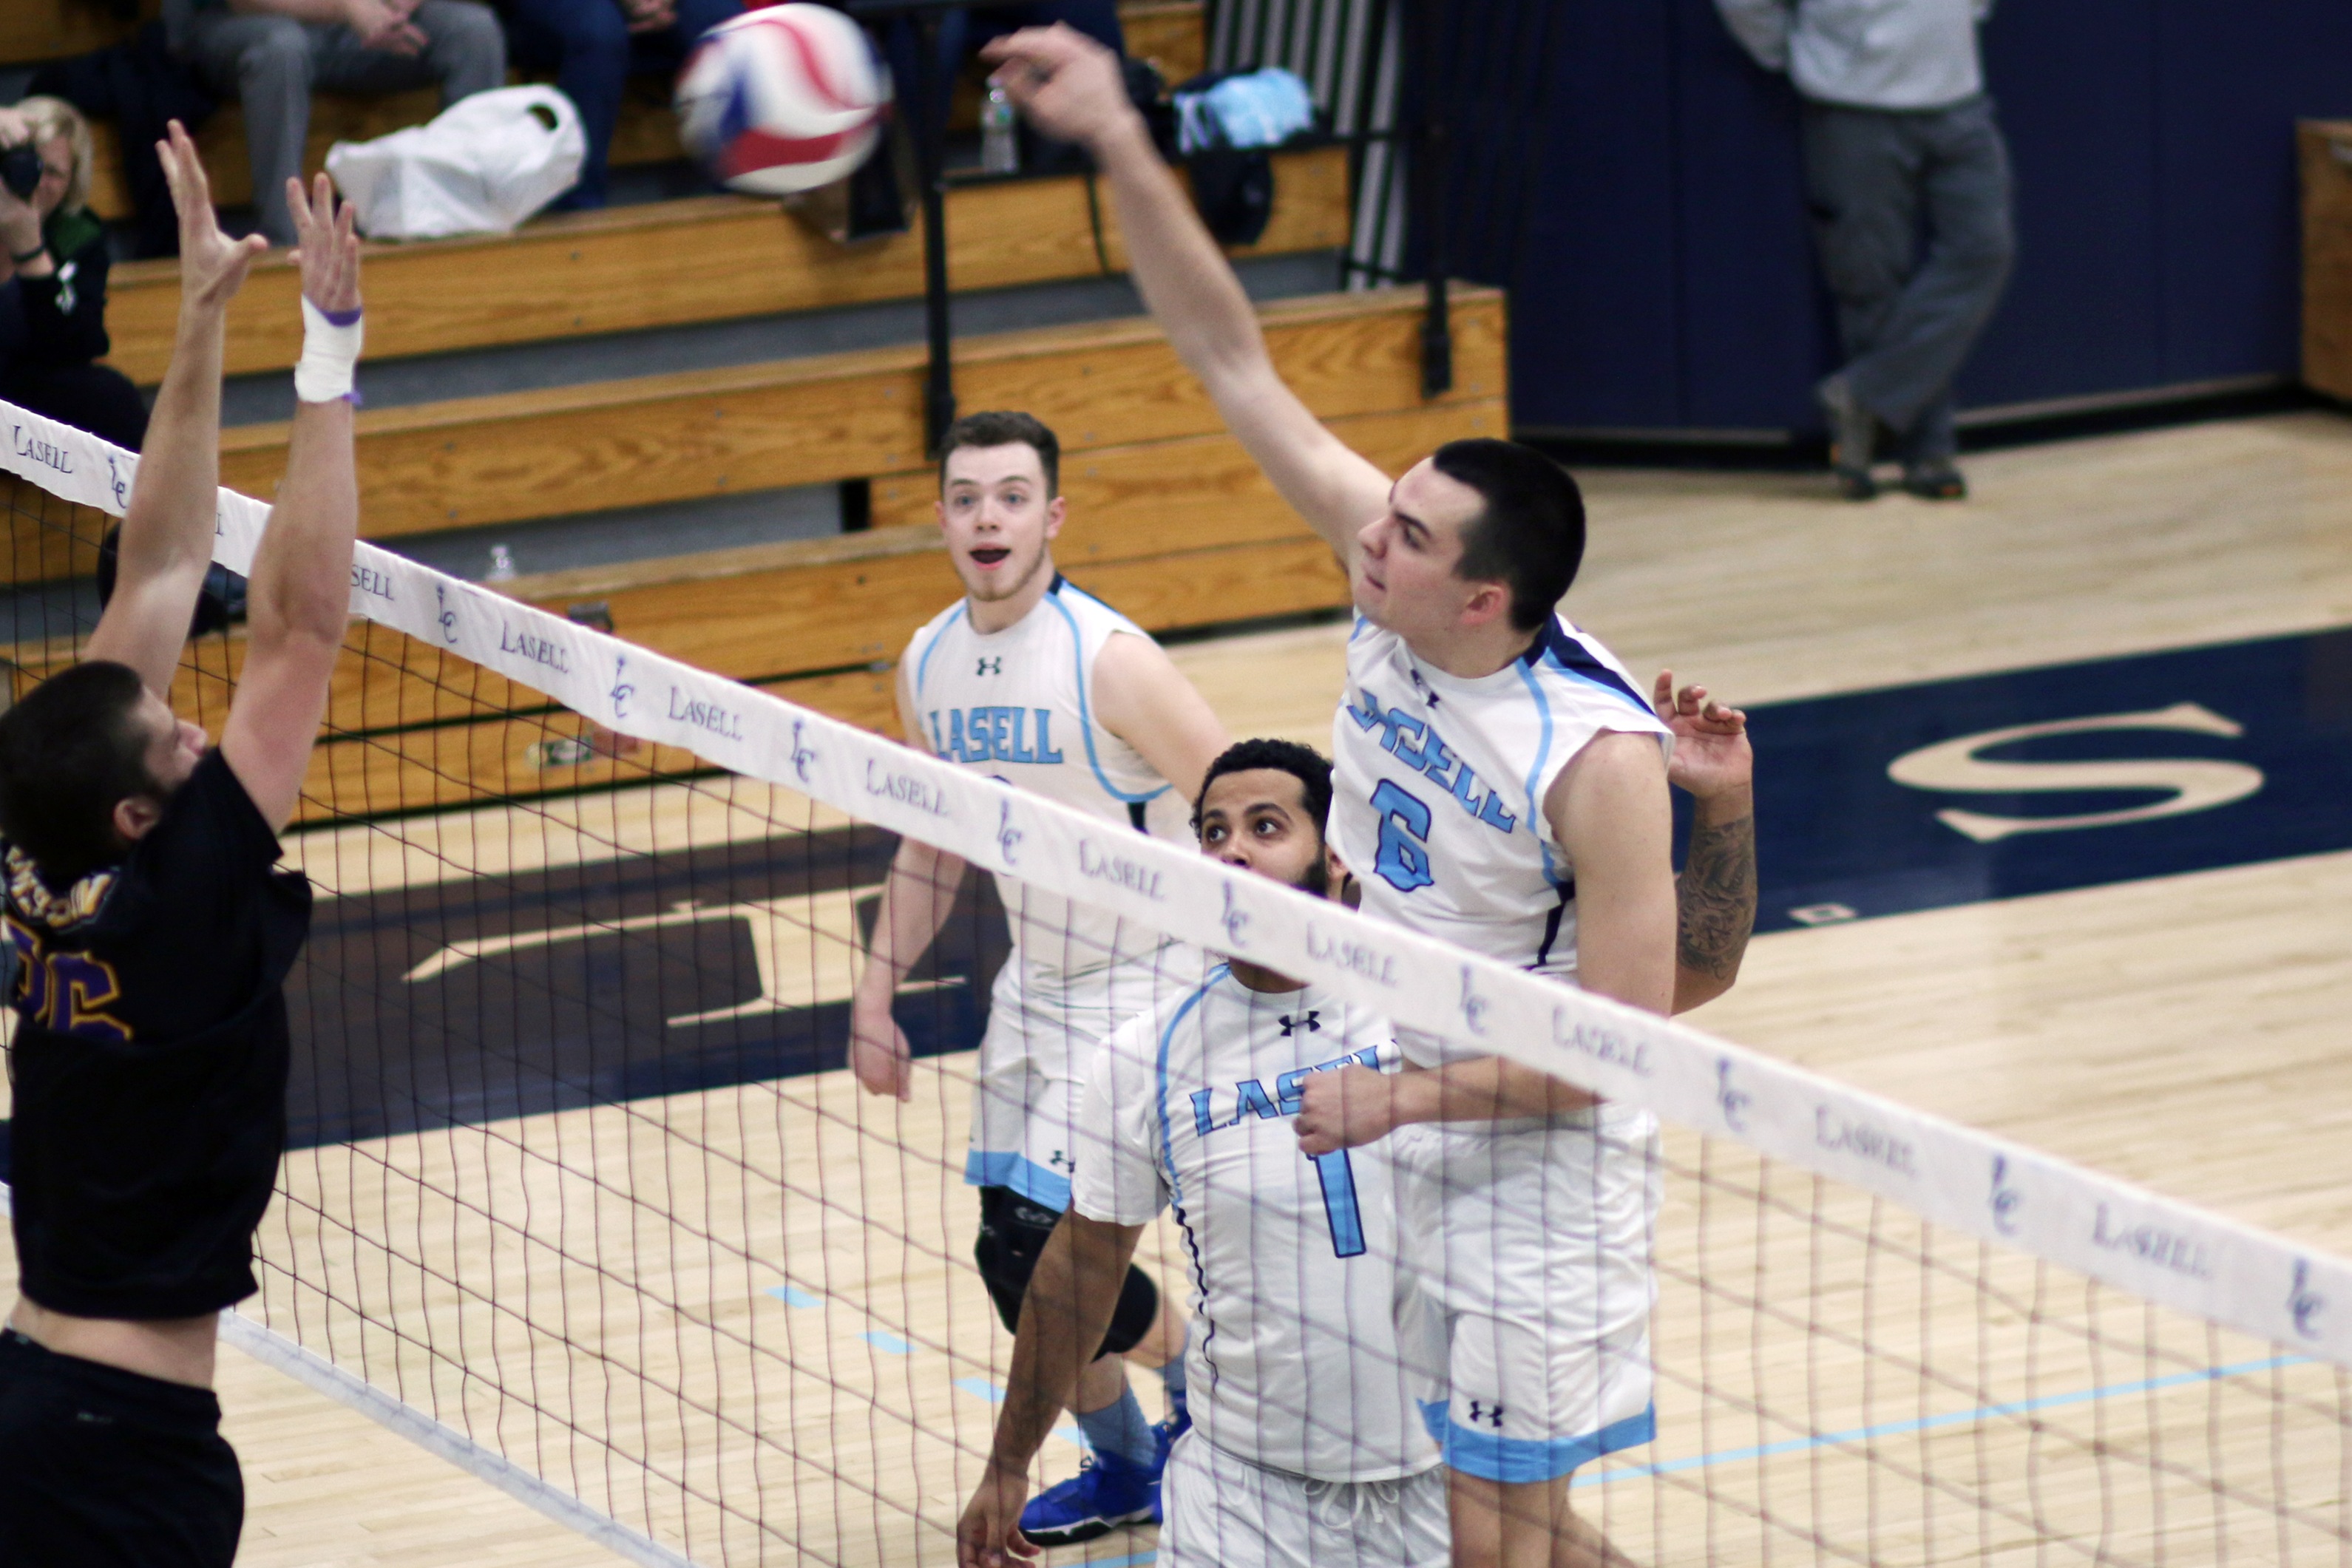 Lasell Men’s Volleyball outlasts Emerson in GNAC match